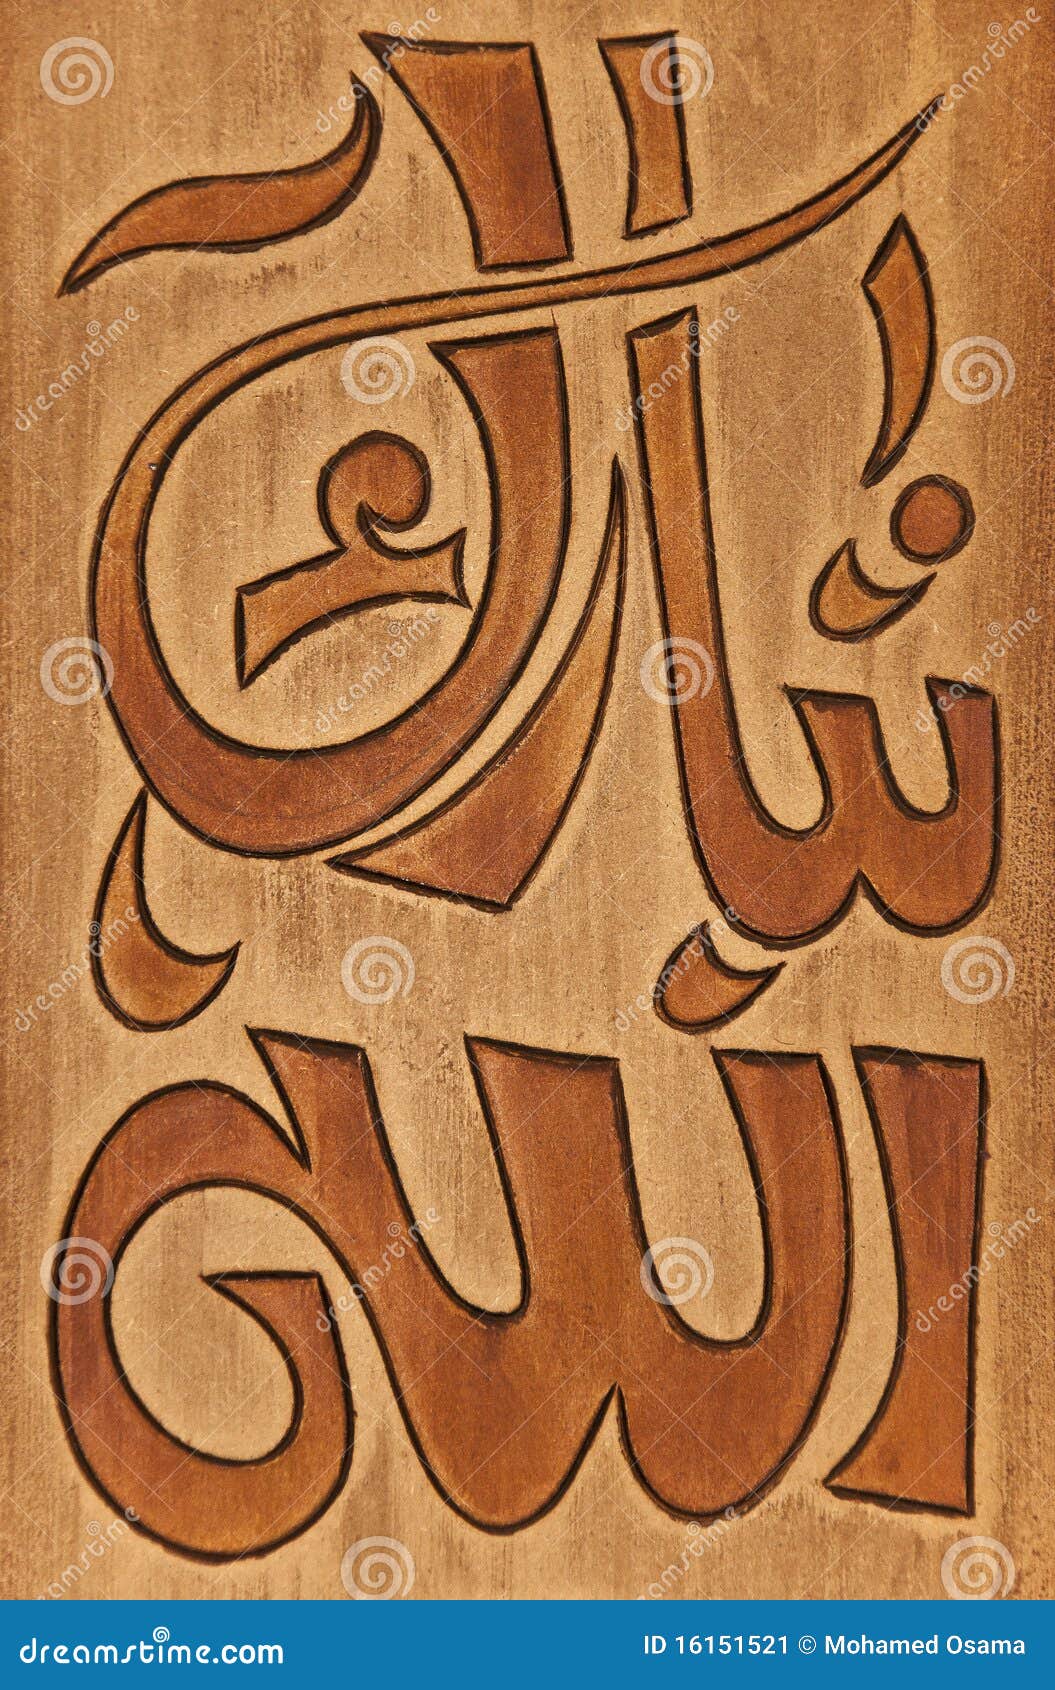 arabic wooden god bless calligraphy